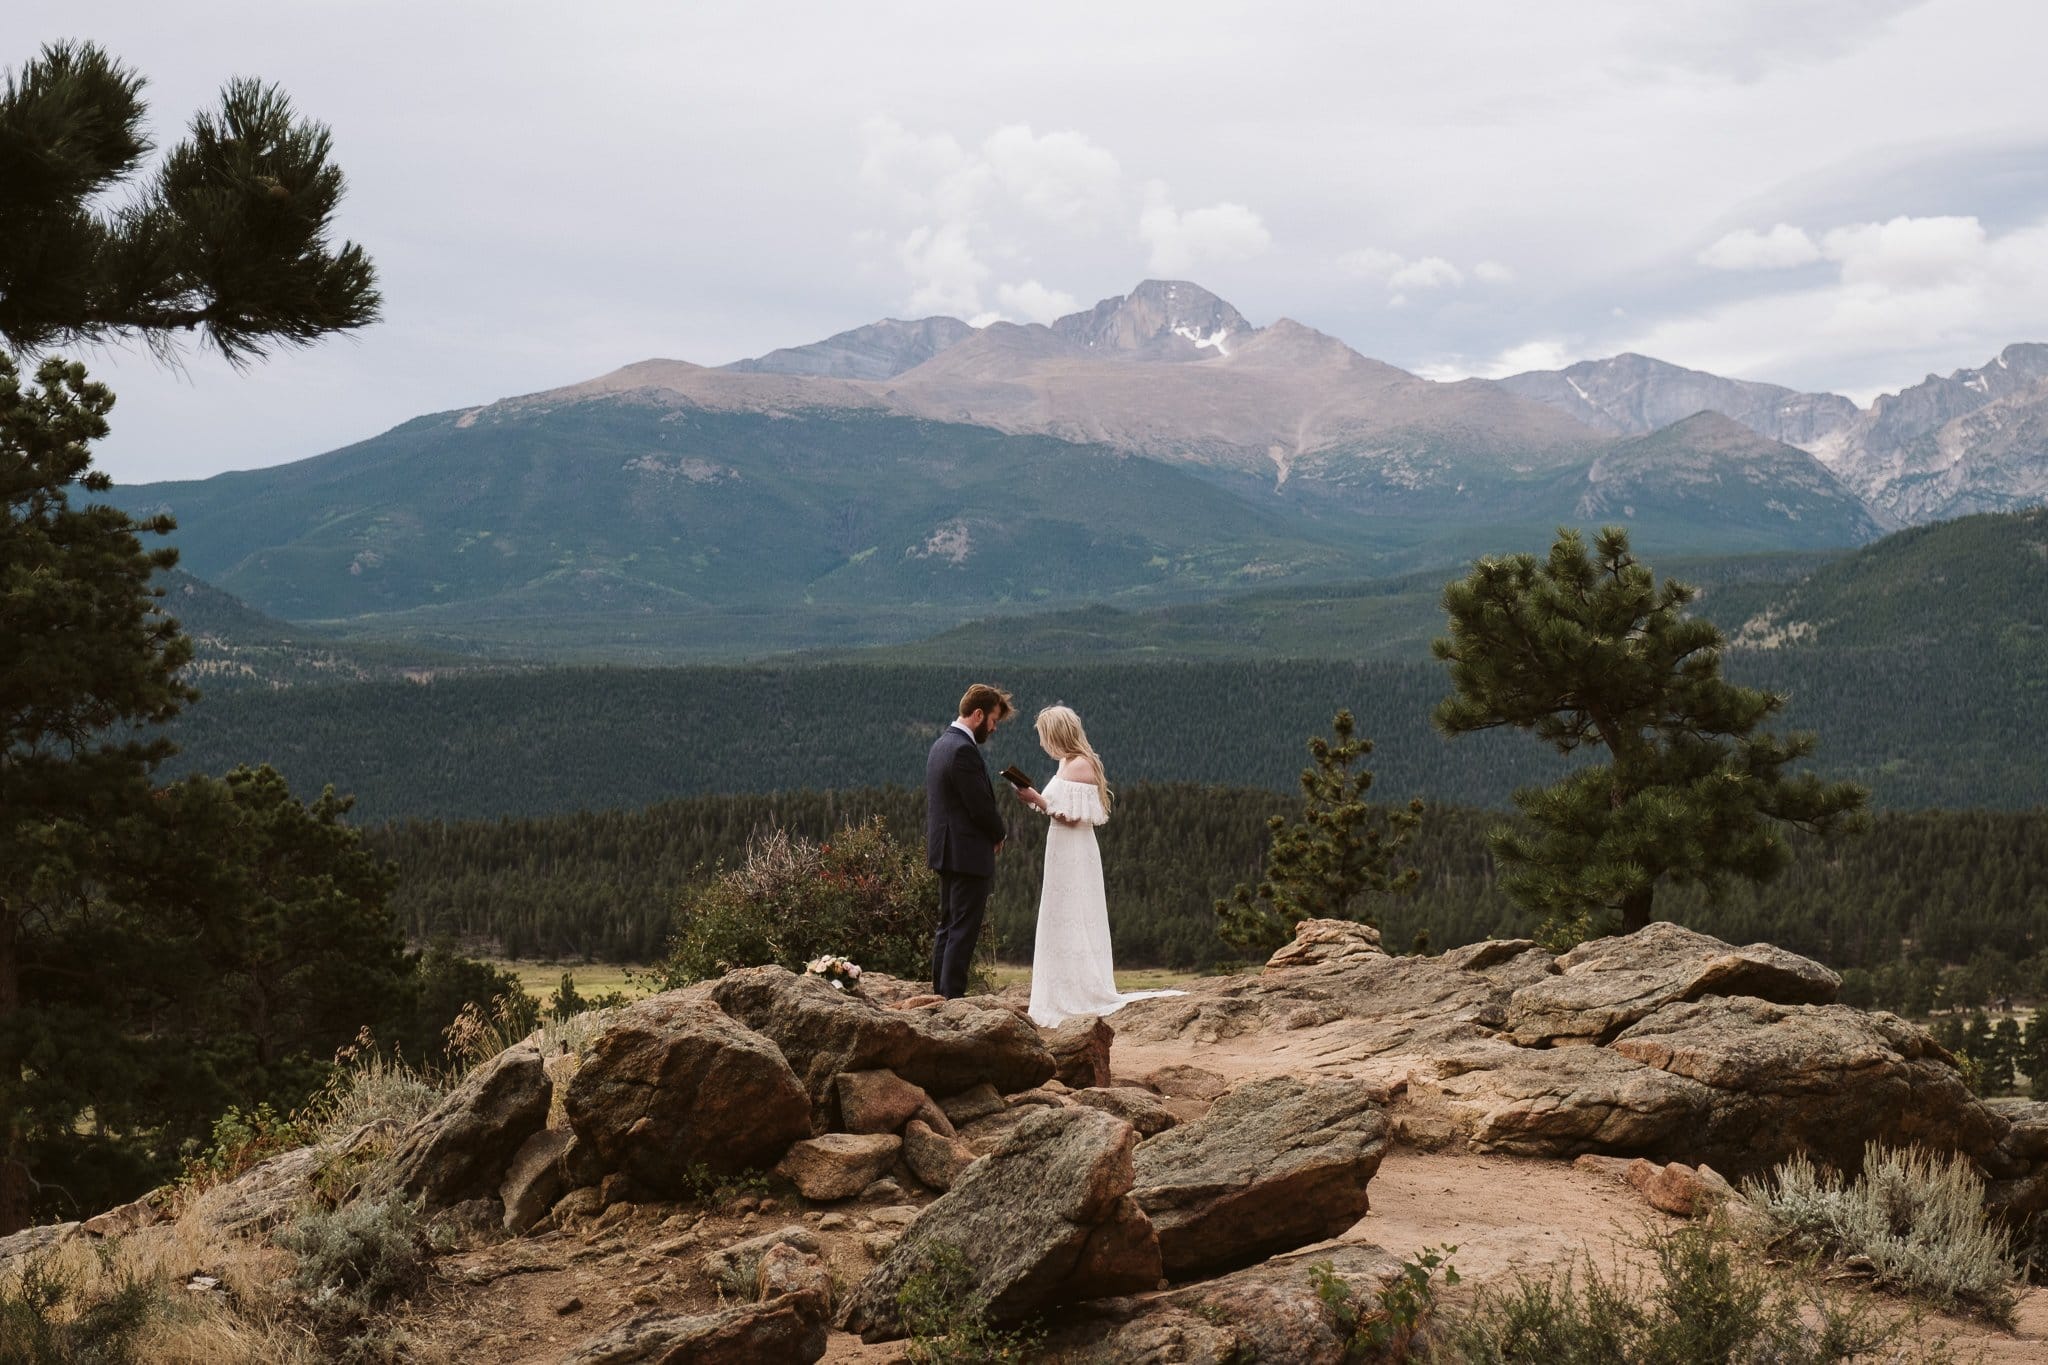 Self-solemnized elopement ceremony in Rocky Mountain National Park.